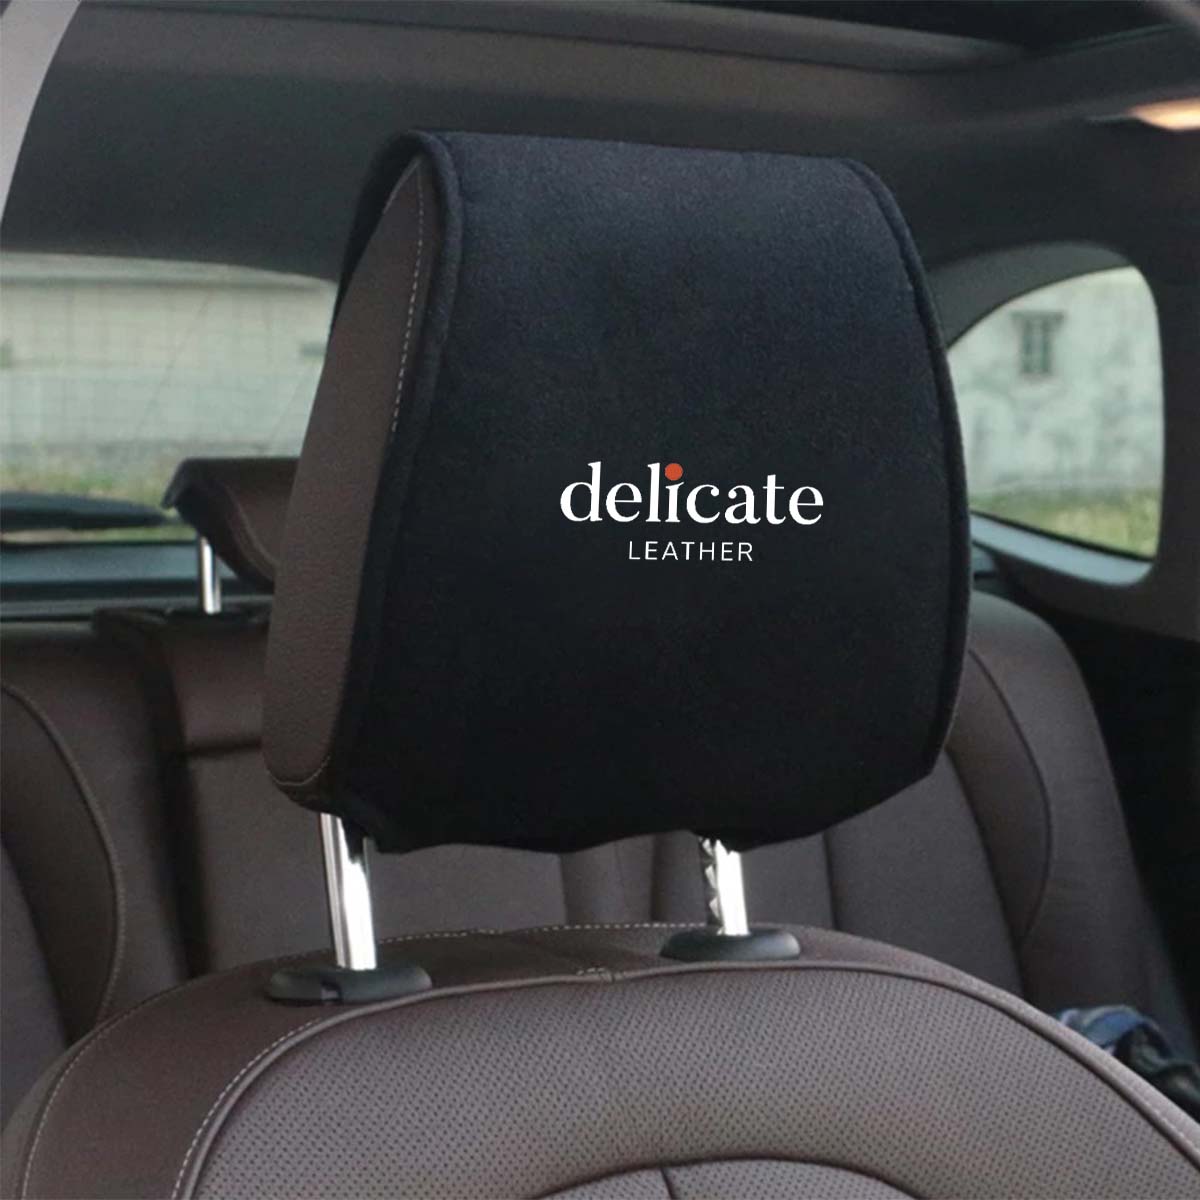 Mazda Car Seat Headrest Cover: Stylish Protection for Your Vehicle's Headrests